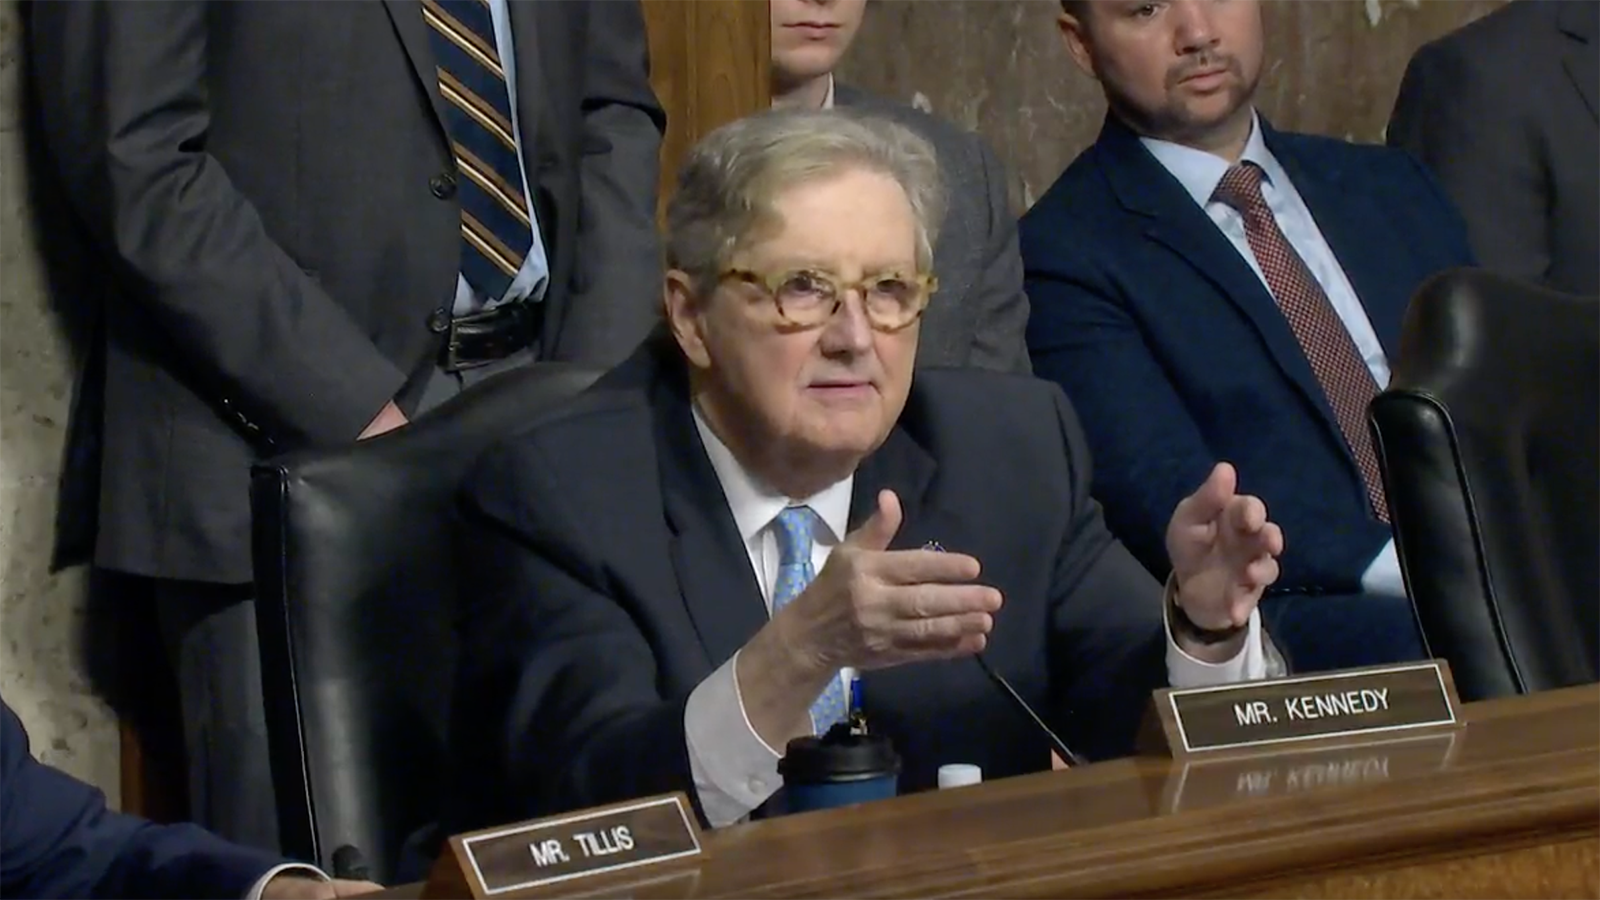 Senator John Kennedy during the US Senate Judiciary Committee hearing "Big Tech and the Online Child Sexual Exploitation Crisis" in Washington, DC, today.